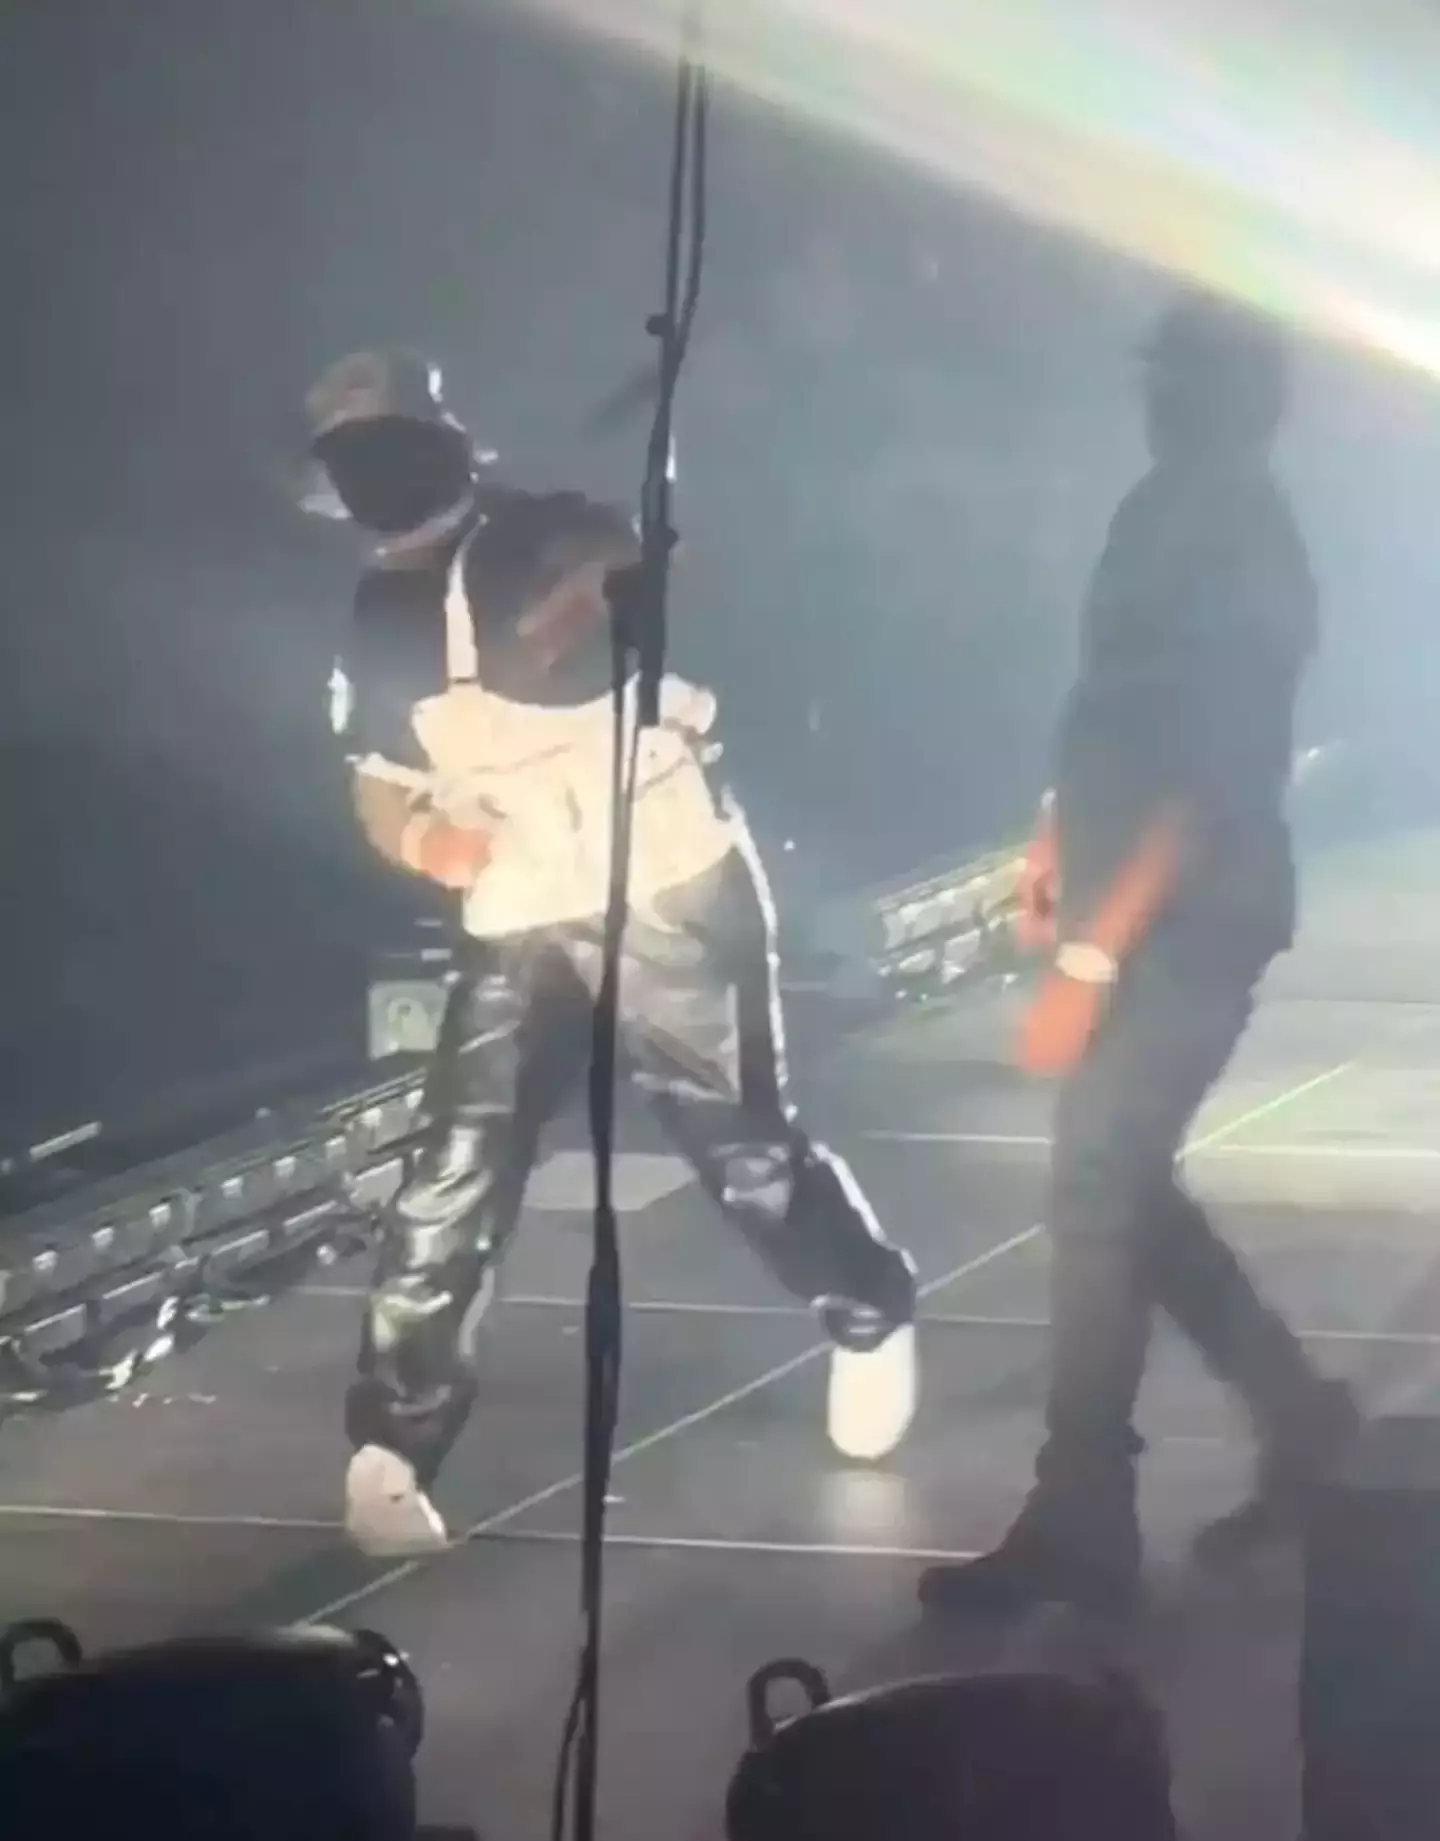 Footage captured the moment 50 Cent threw his mic off the stage in LA.